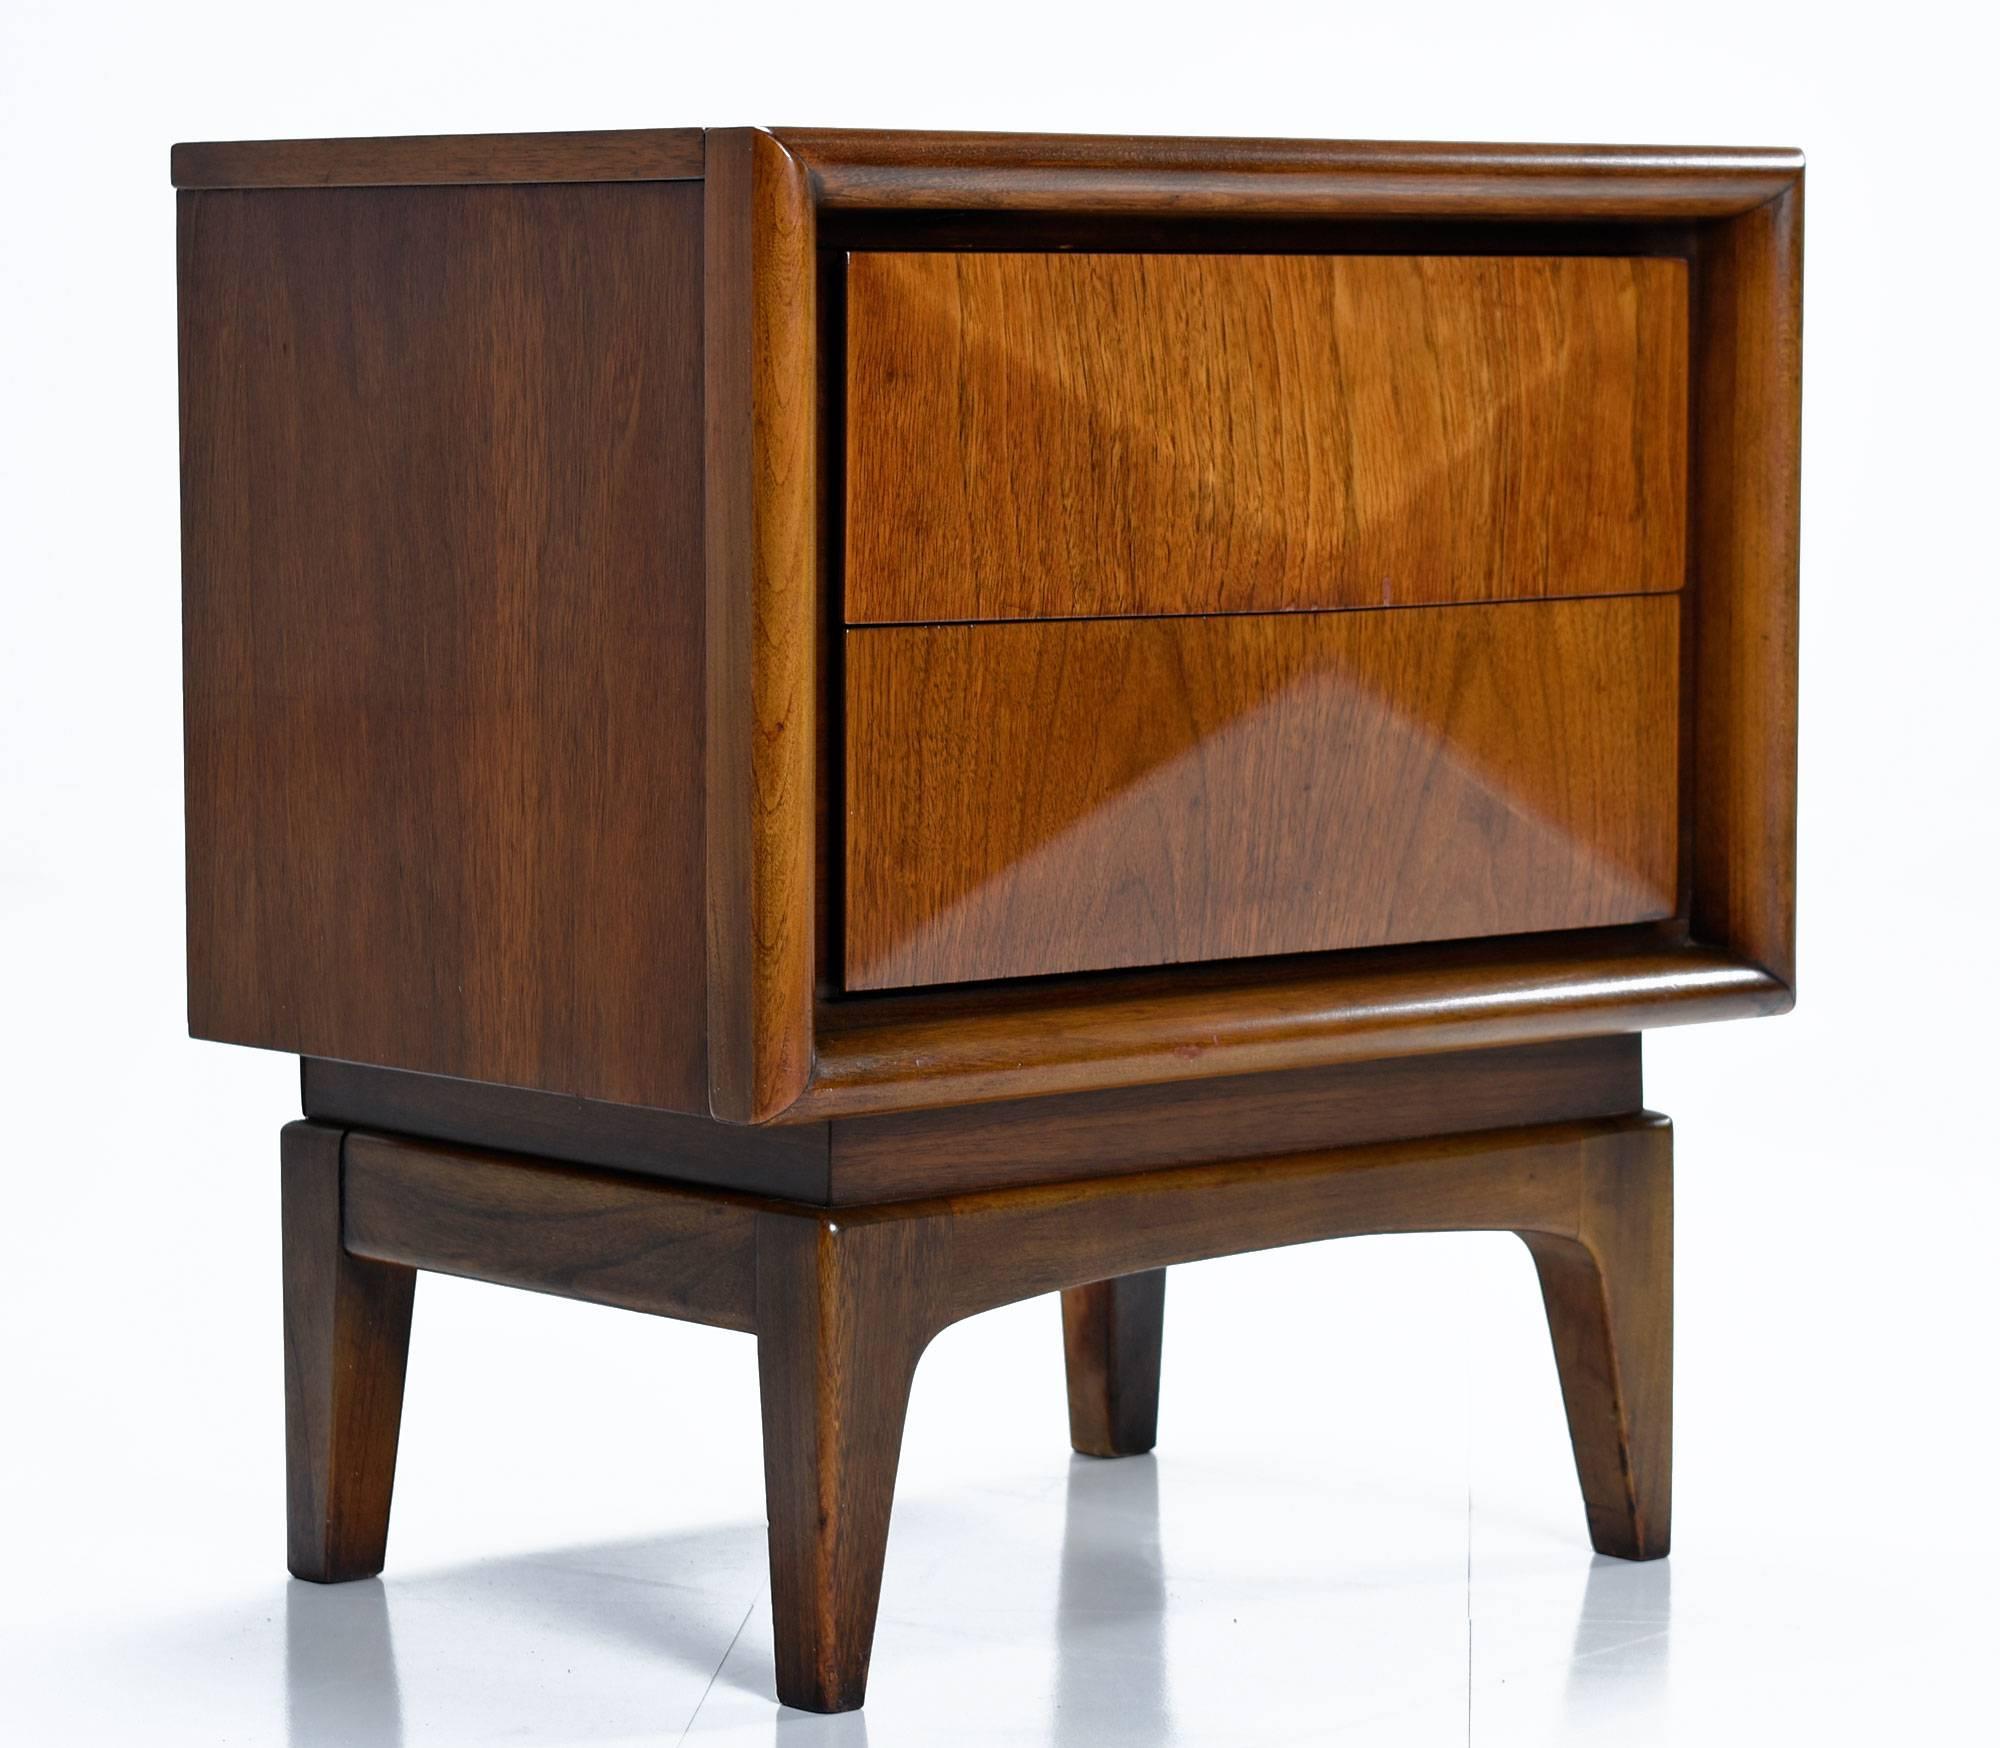 Mid-Century Modern United Furniture Company vintage, circa 1960s two-drawer matching nightstands. Danish style profile with expert, durable, American craftsmanship. Walnut wood veneer over solid wood. The drawers all feature. 5″ thick wood facades